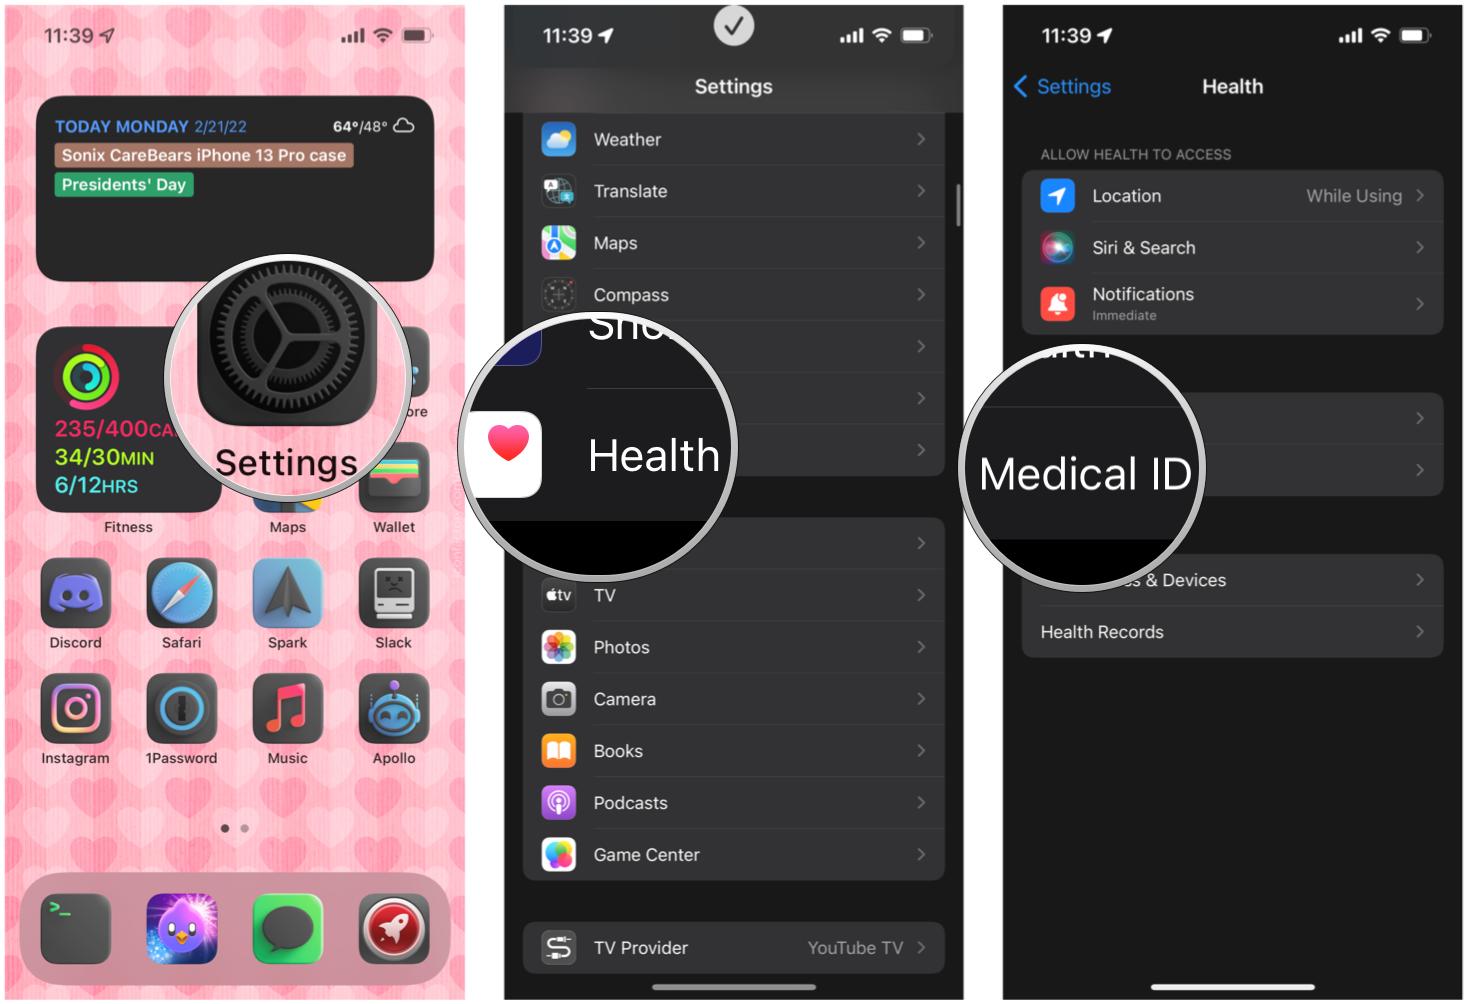 Set up Medical ID on iPhone in Settings: Launch Settingsg, tap Health, tap Medical ID